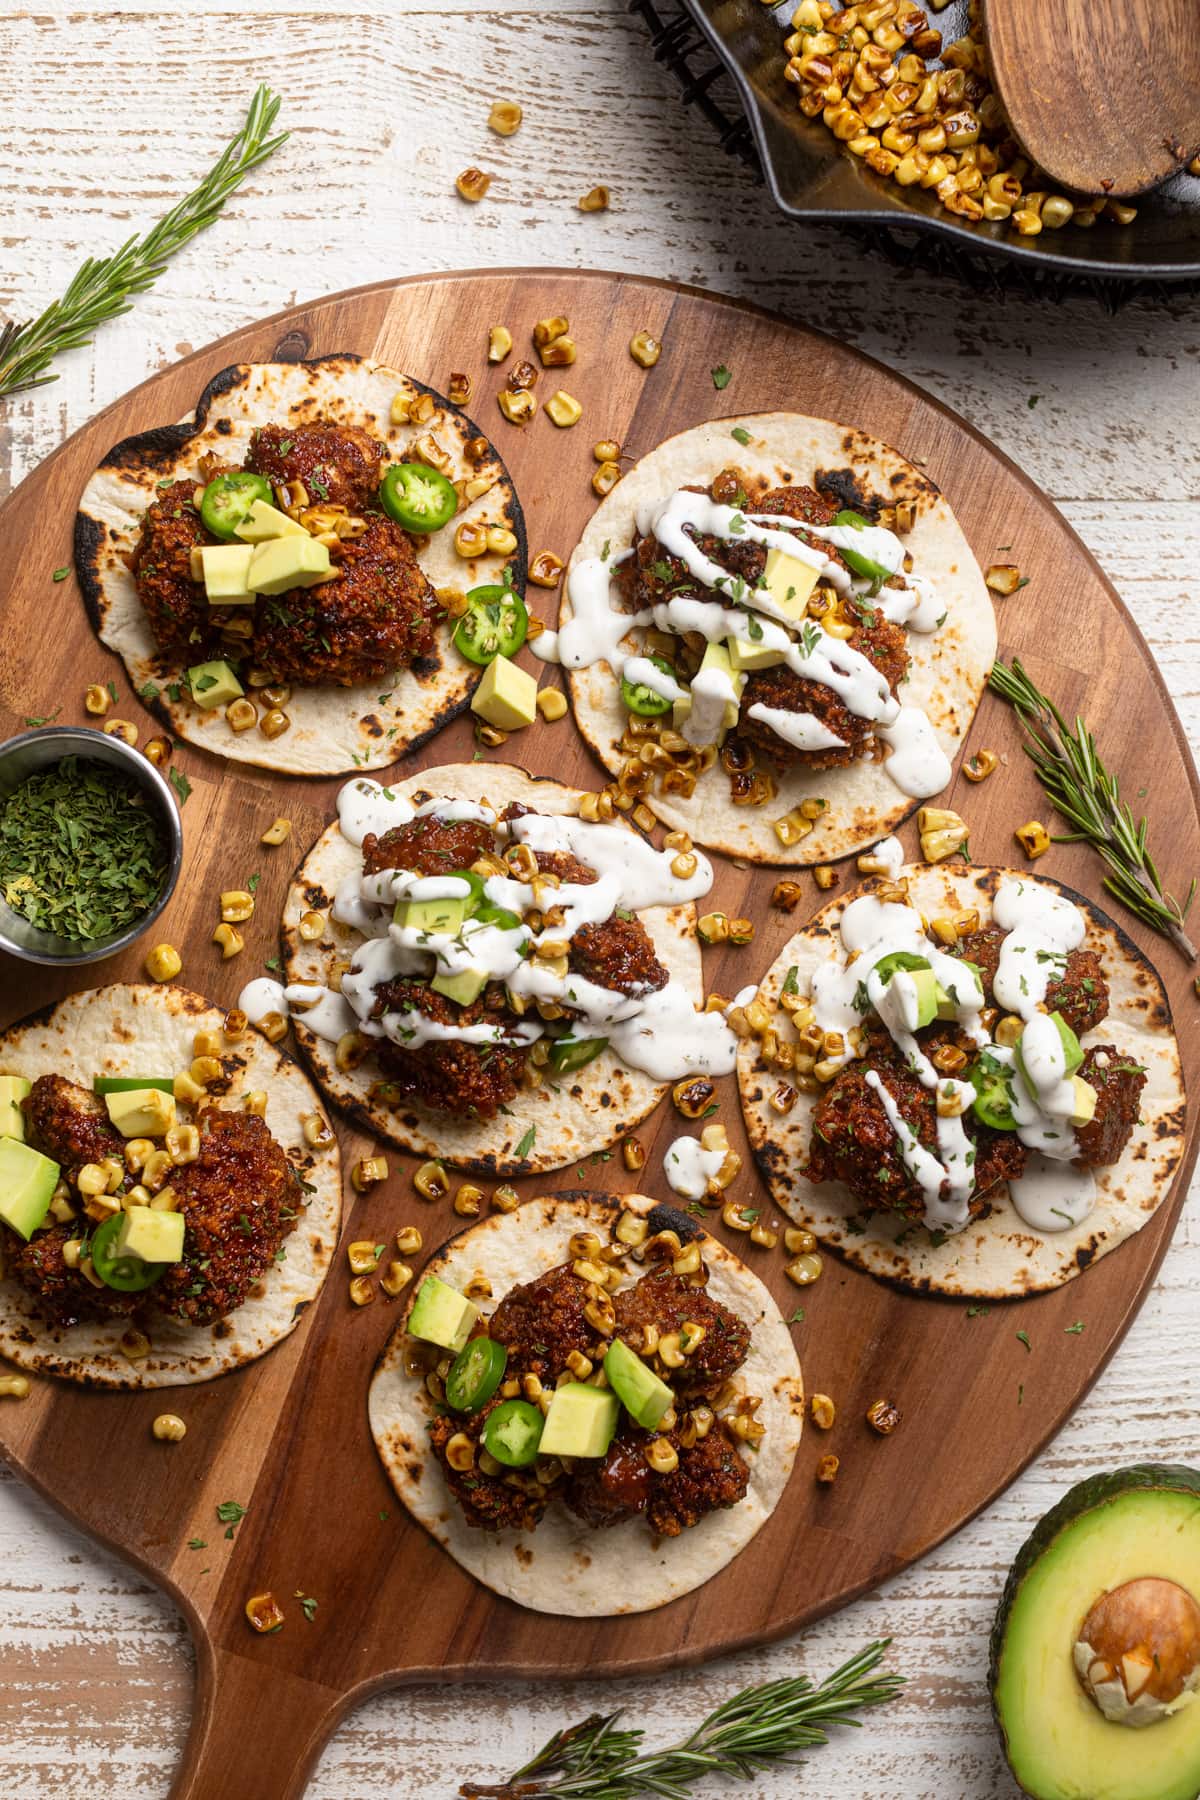 Barbeque Cauliflower Tacos topped with white dressing, jalapeno slices, and avocado